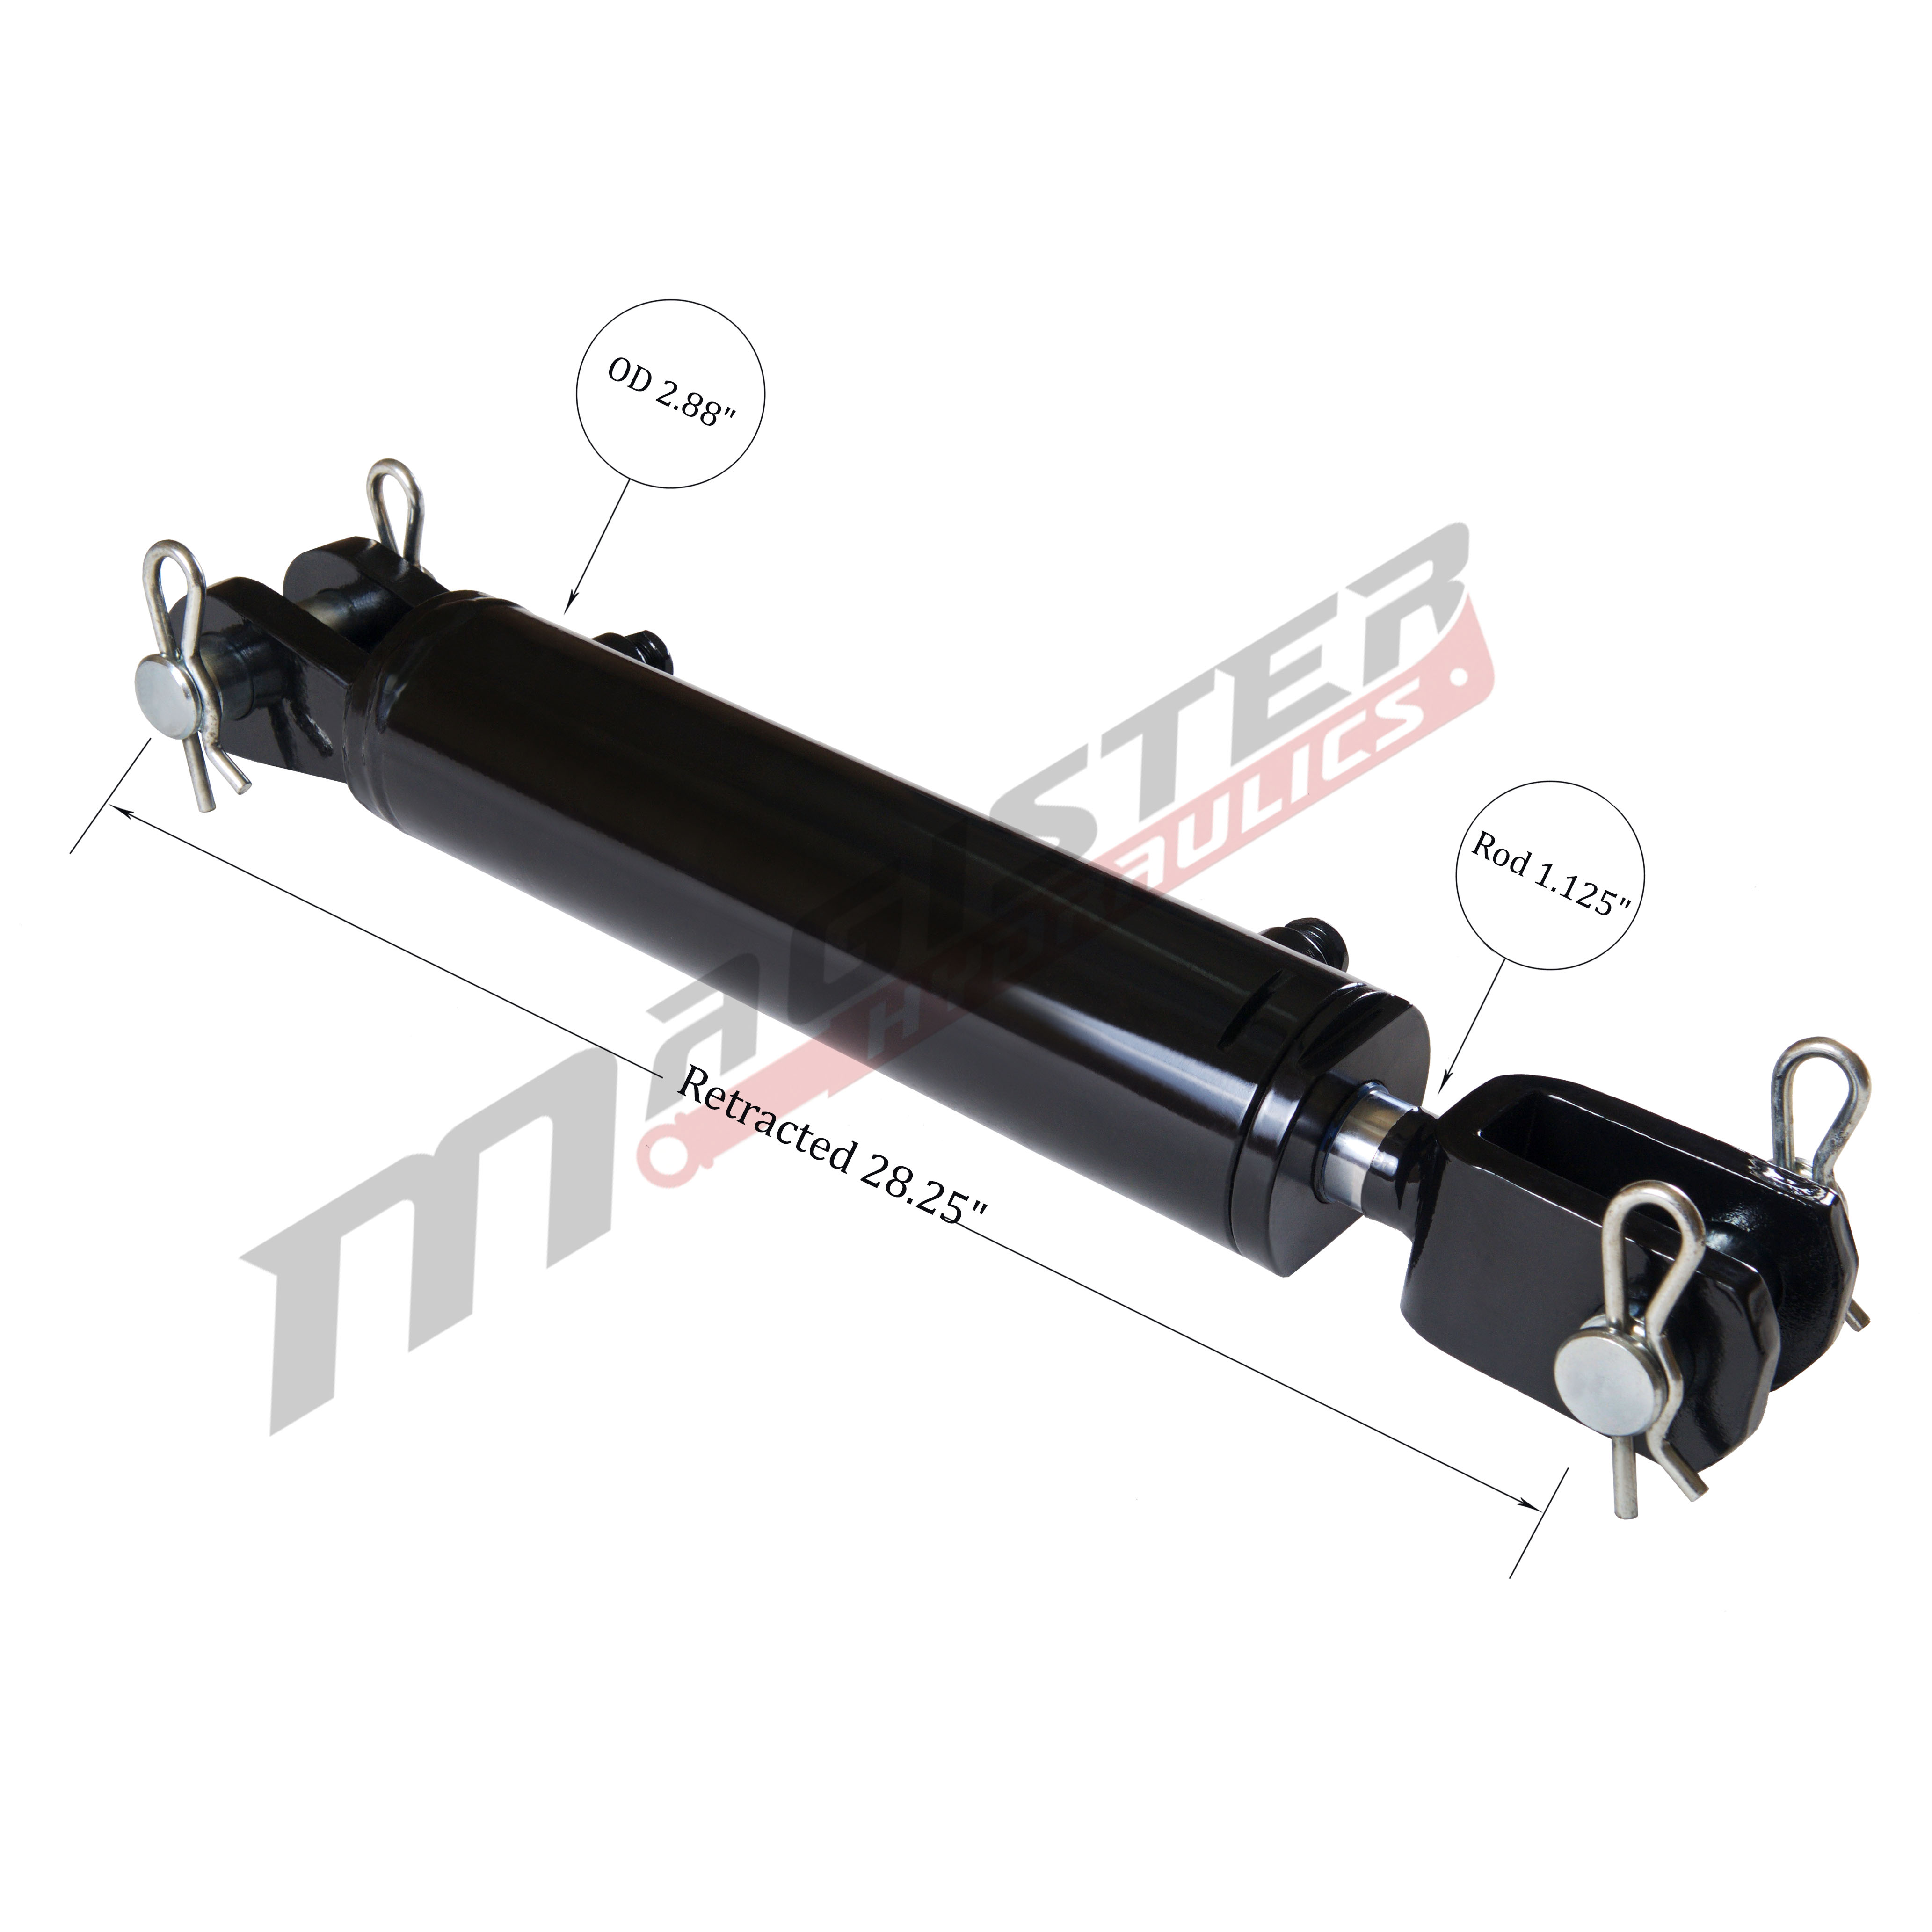 2.5 bore x 18 stroke hydraulic cylinder, ag clevis double acting cylinder | Magister Hydraulics